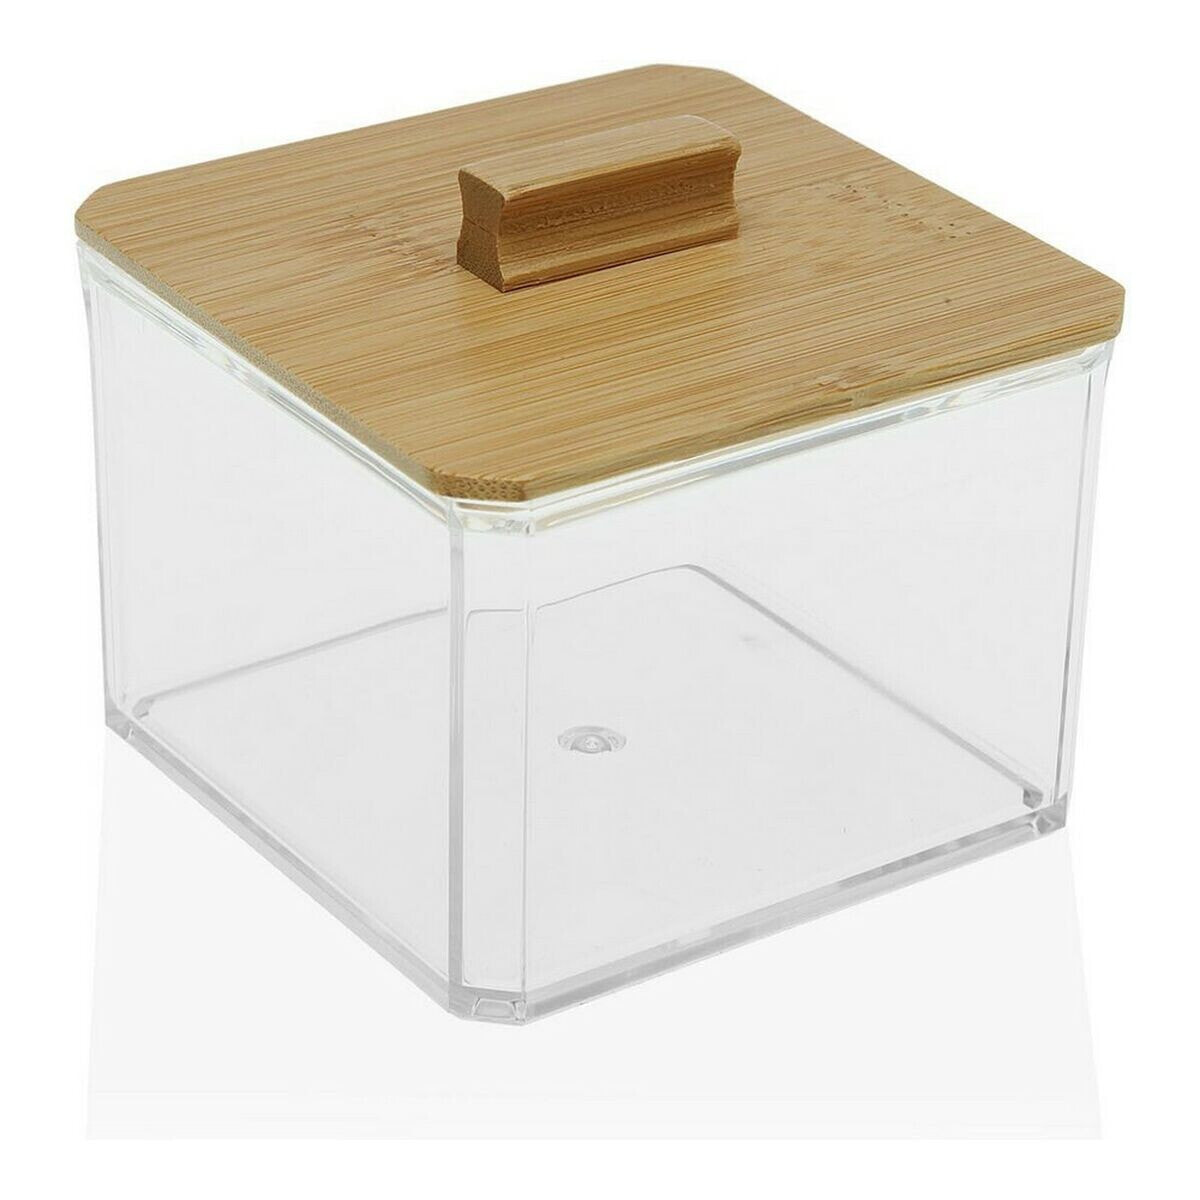 Box with cover Versa Bamboo polystyrene (9 x 8,5 x 9 cm)